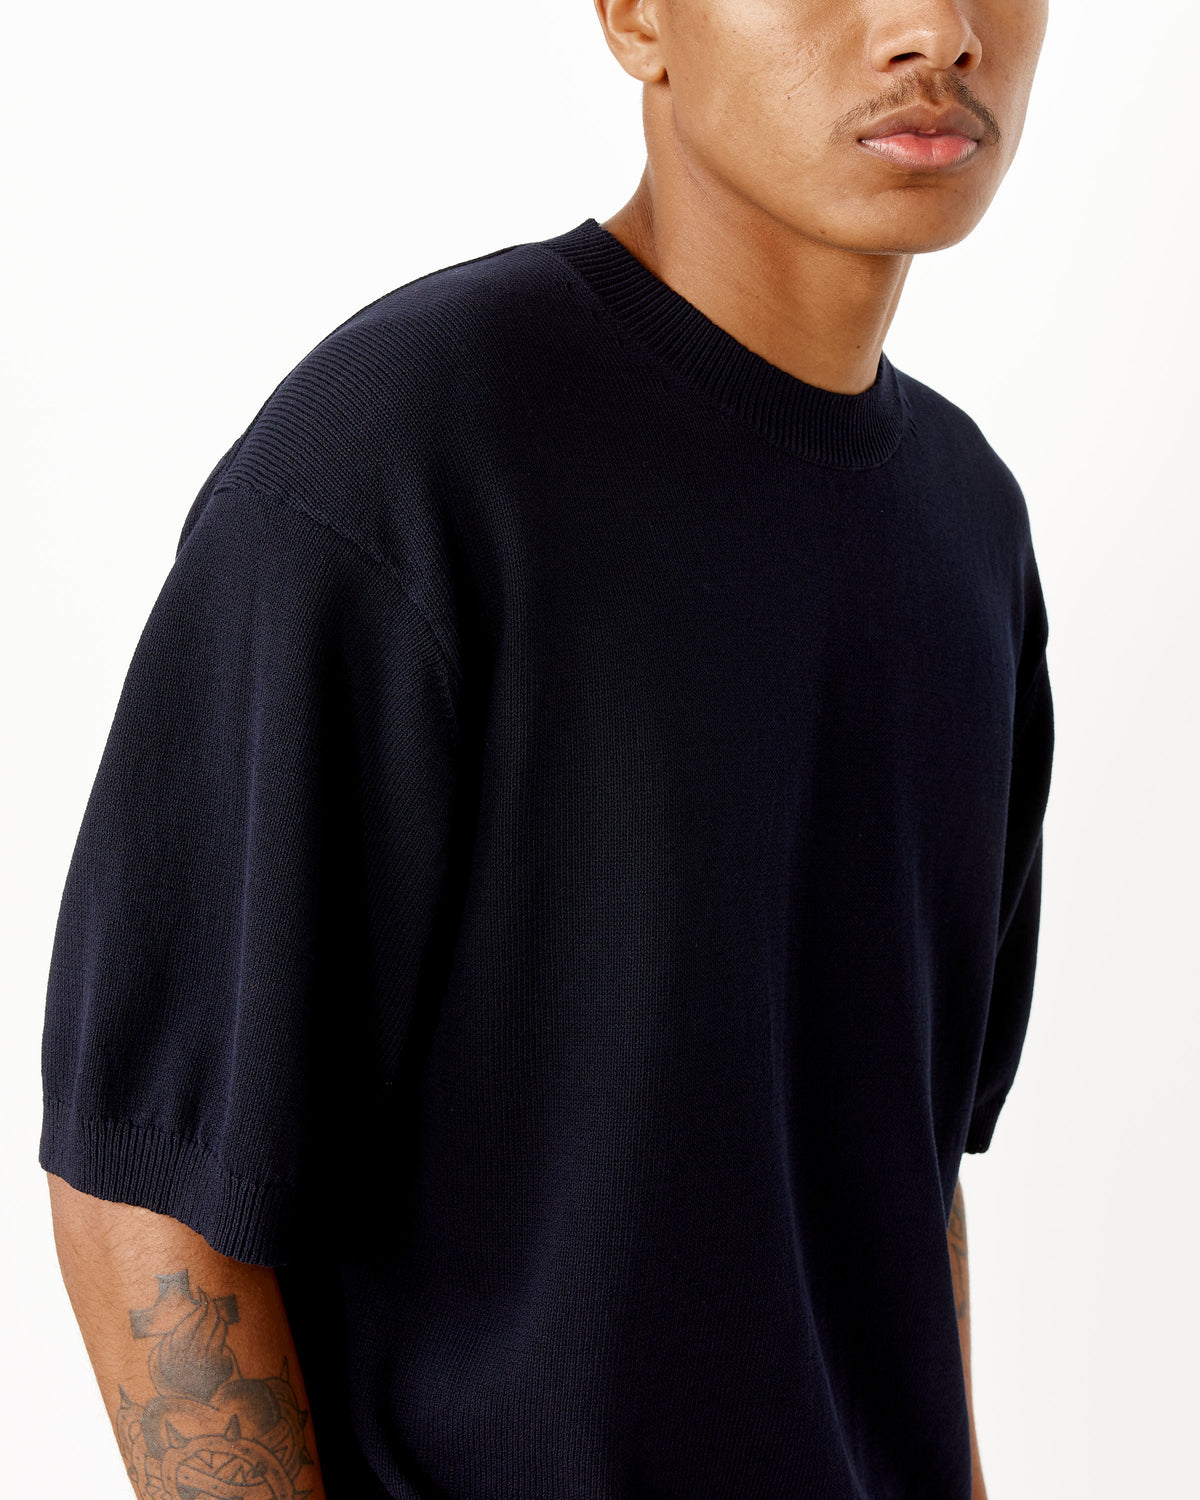 Explore our exciting line of 7GG Knit T-shirt Studio Nicholson